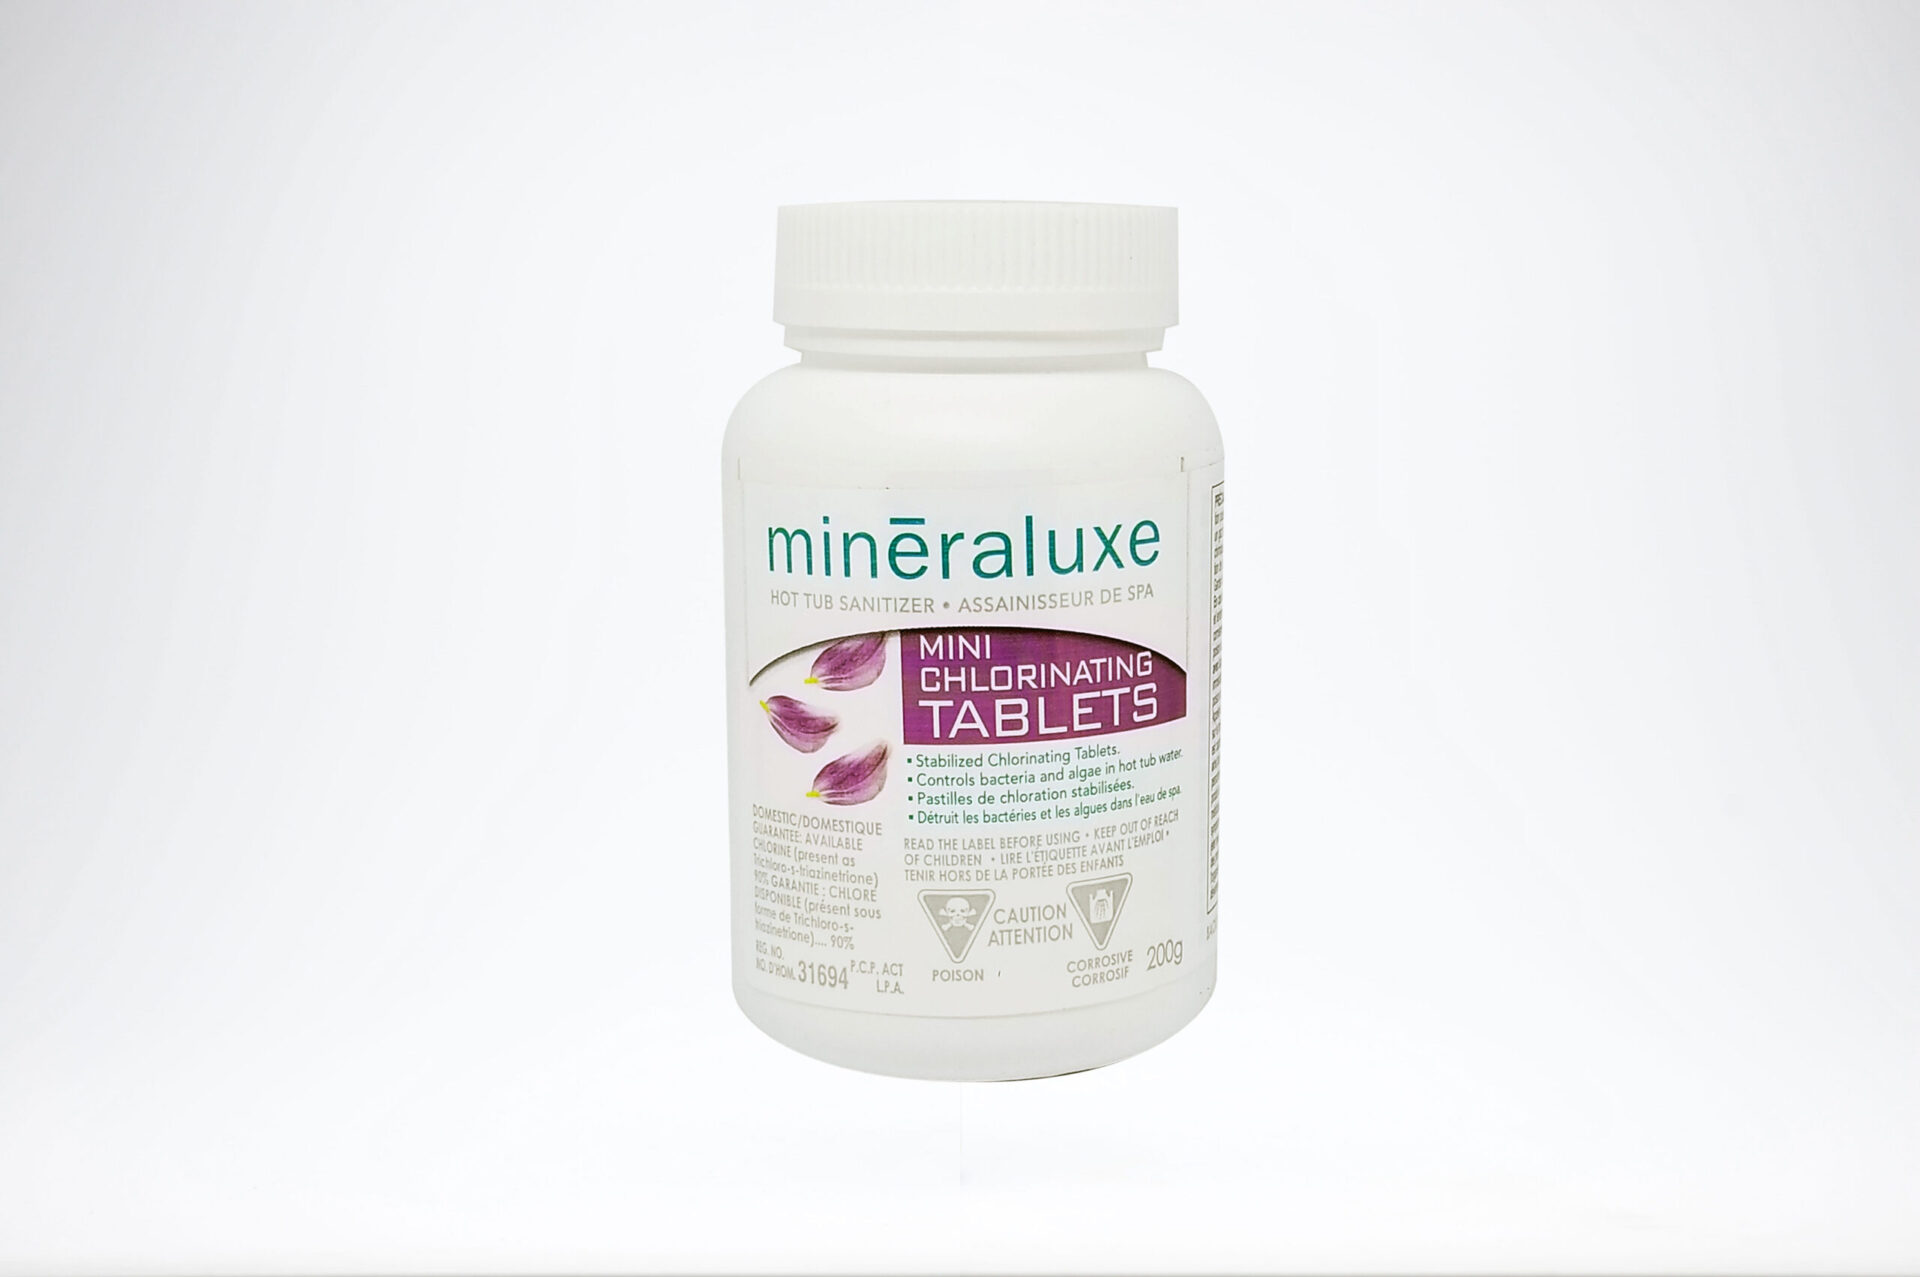 Mineraluxe Chlorinating Tablets 200g 1 scaled - Mineraluxe Chlorinating Tablets 200g